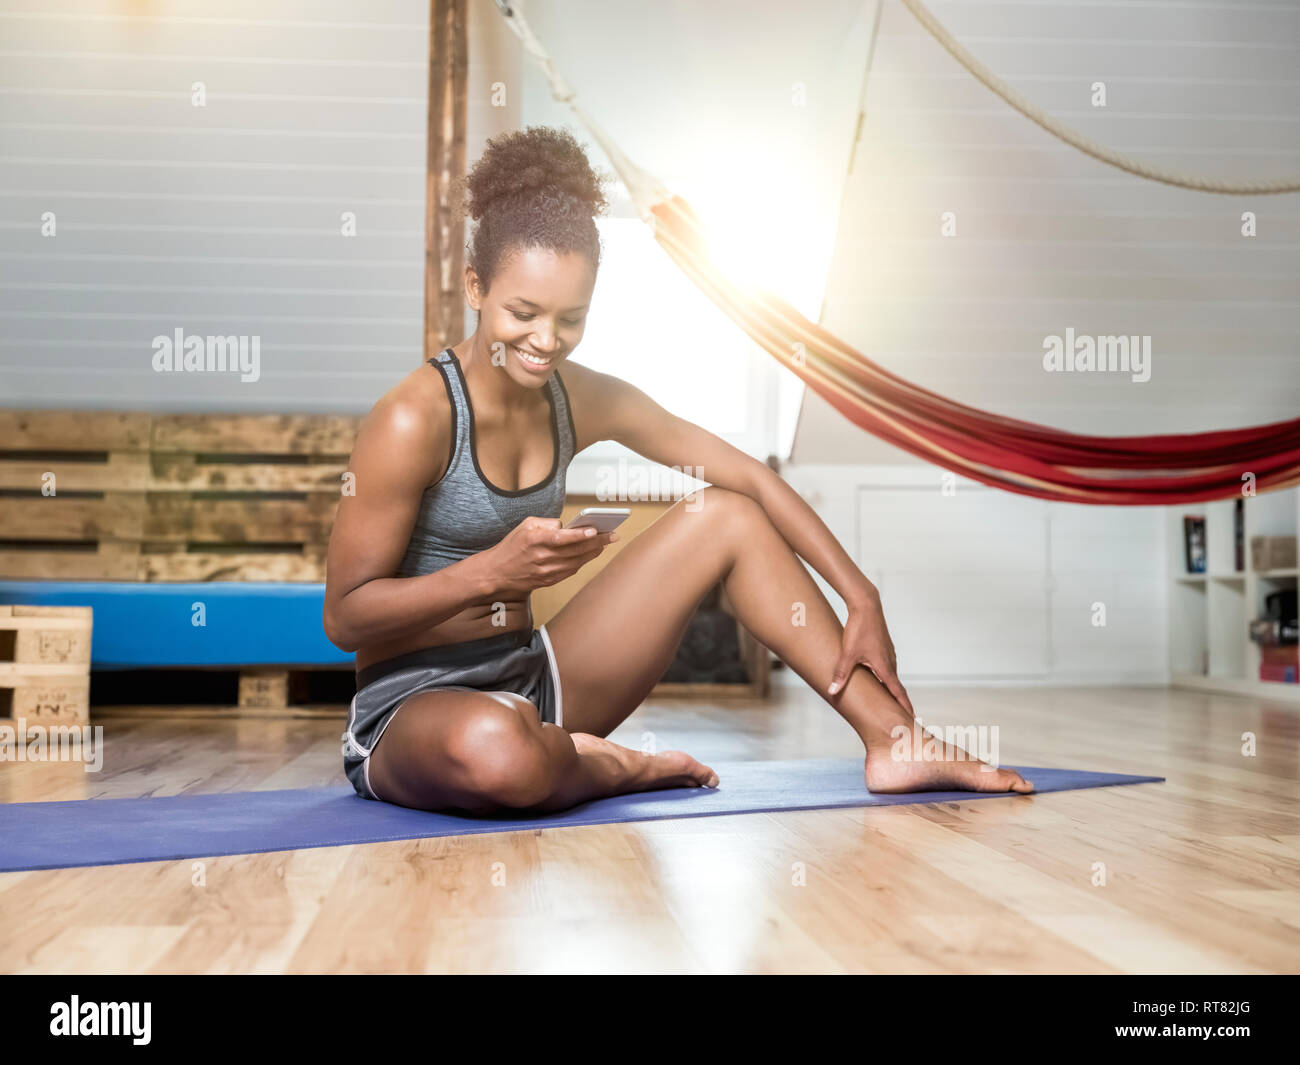 Smiling young woman sitting on yoga mat looking at cell phone Stock Photo